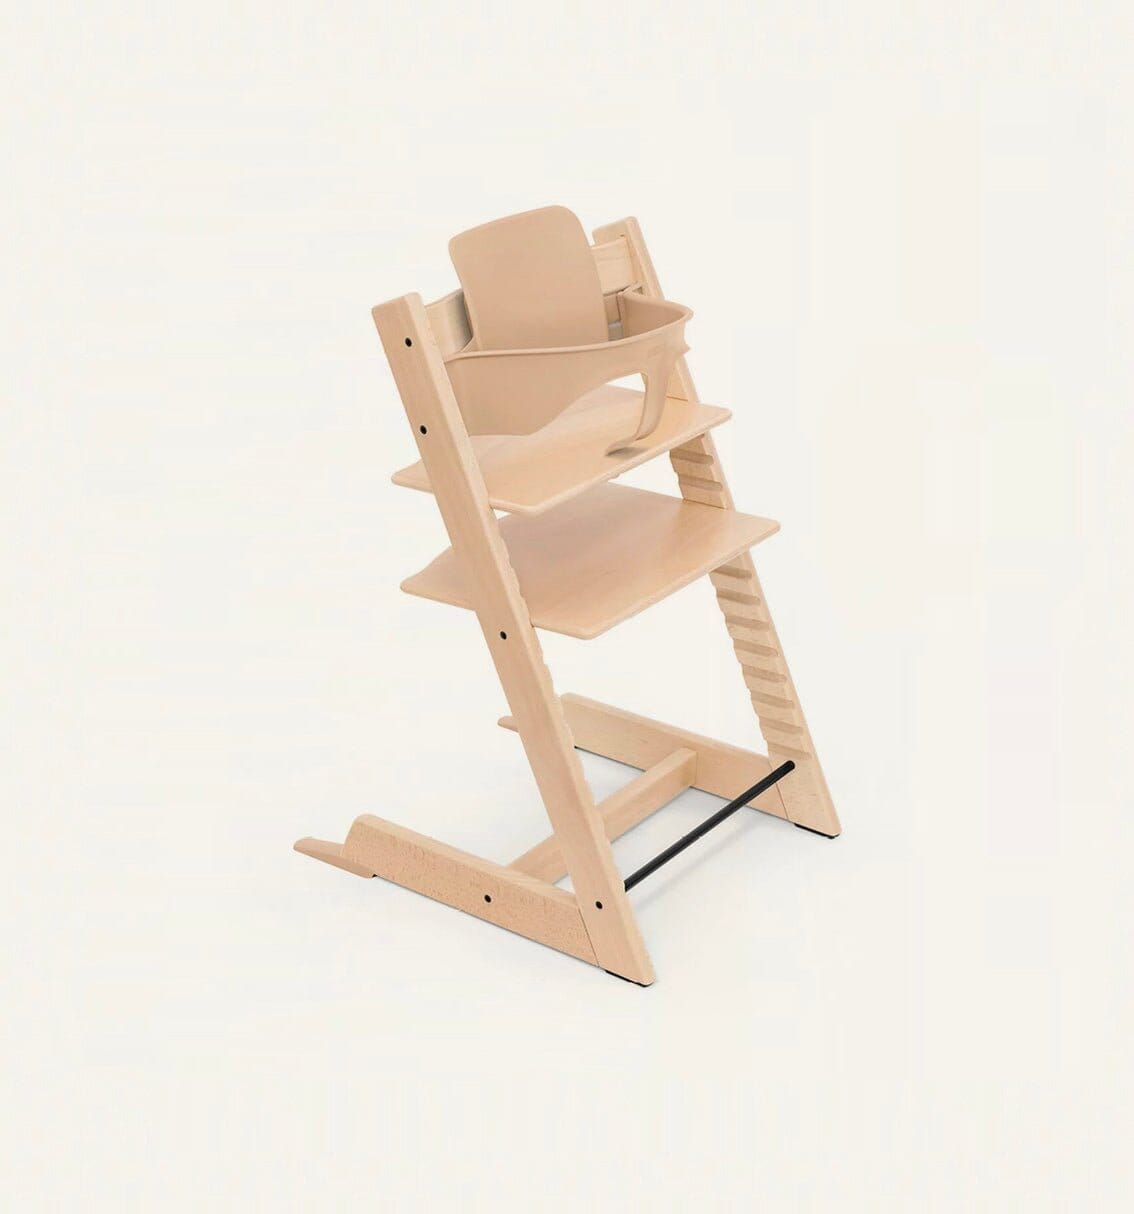 Rent the Stokke Tripp Trapp Babyset from just £7 a month